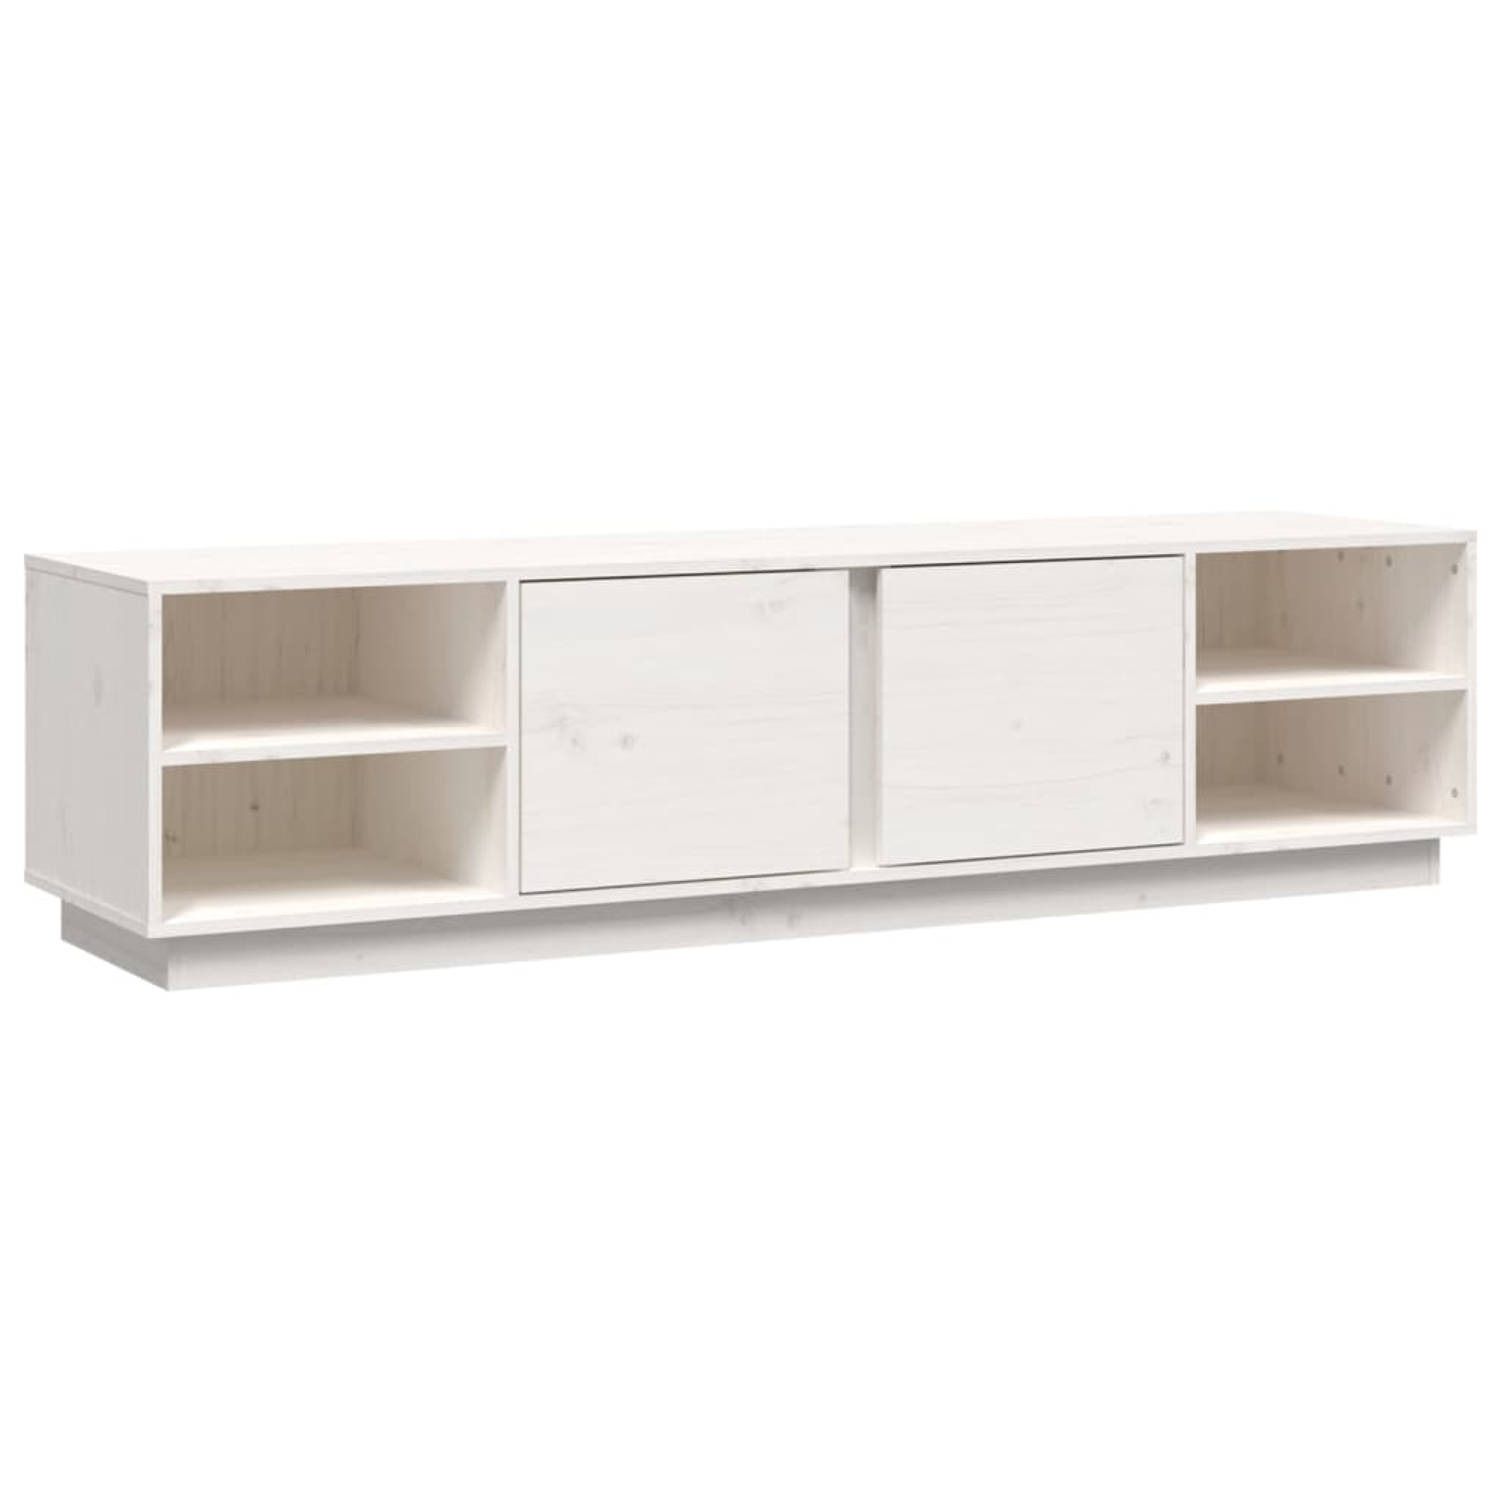 The Living Store TV-meubel - Grenenhout - 156 x 40 x 40 cm - Wit